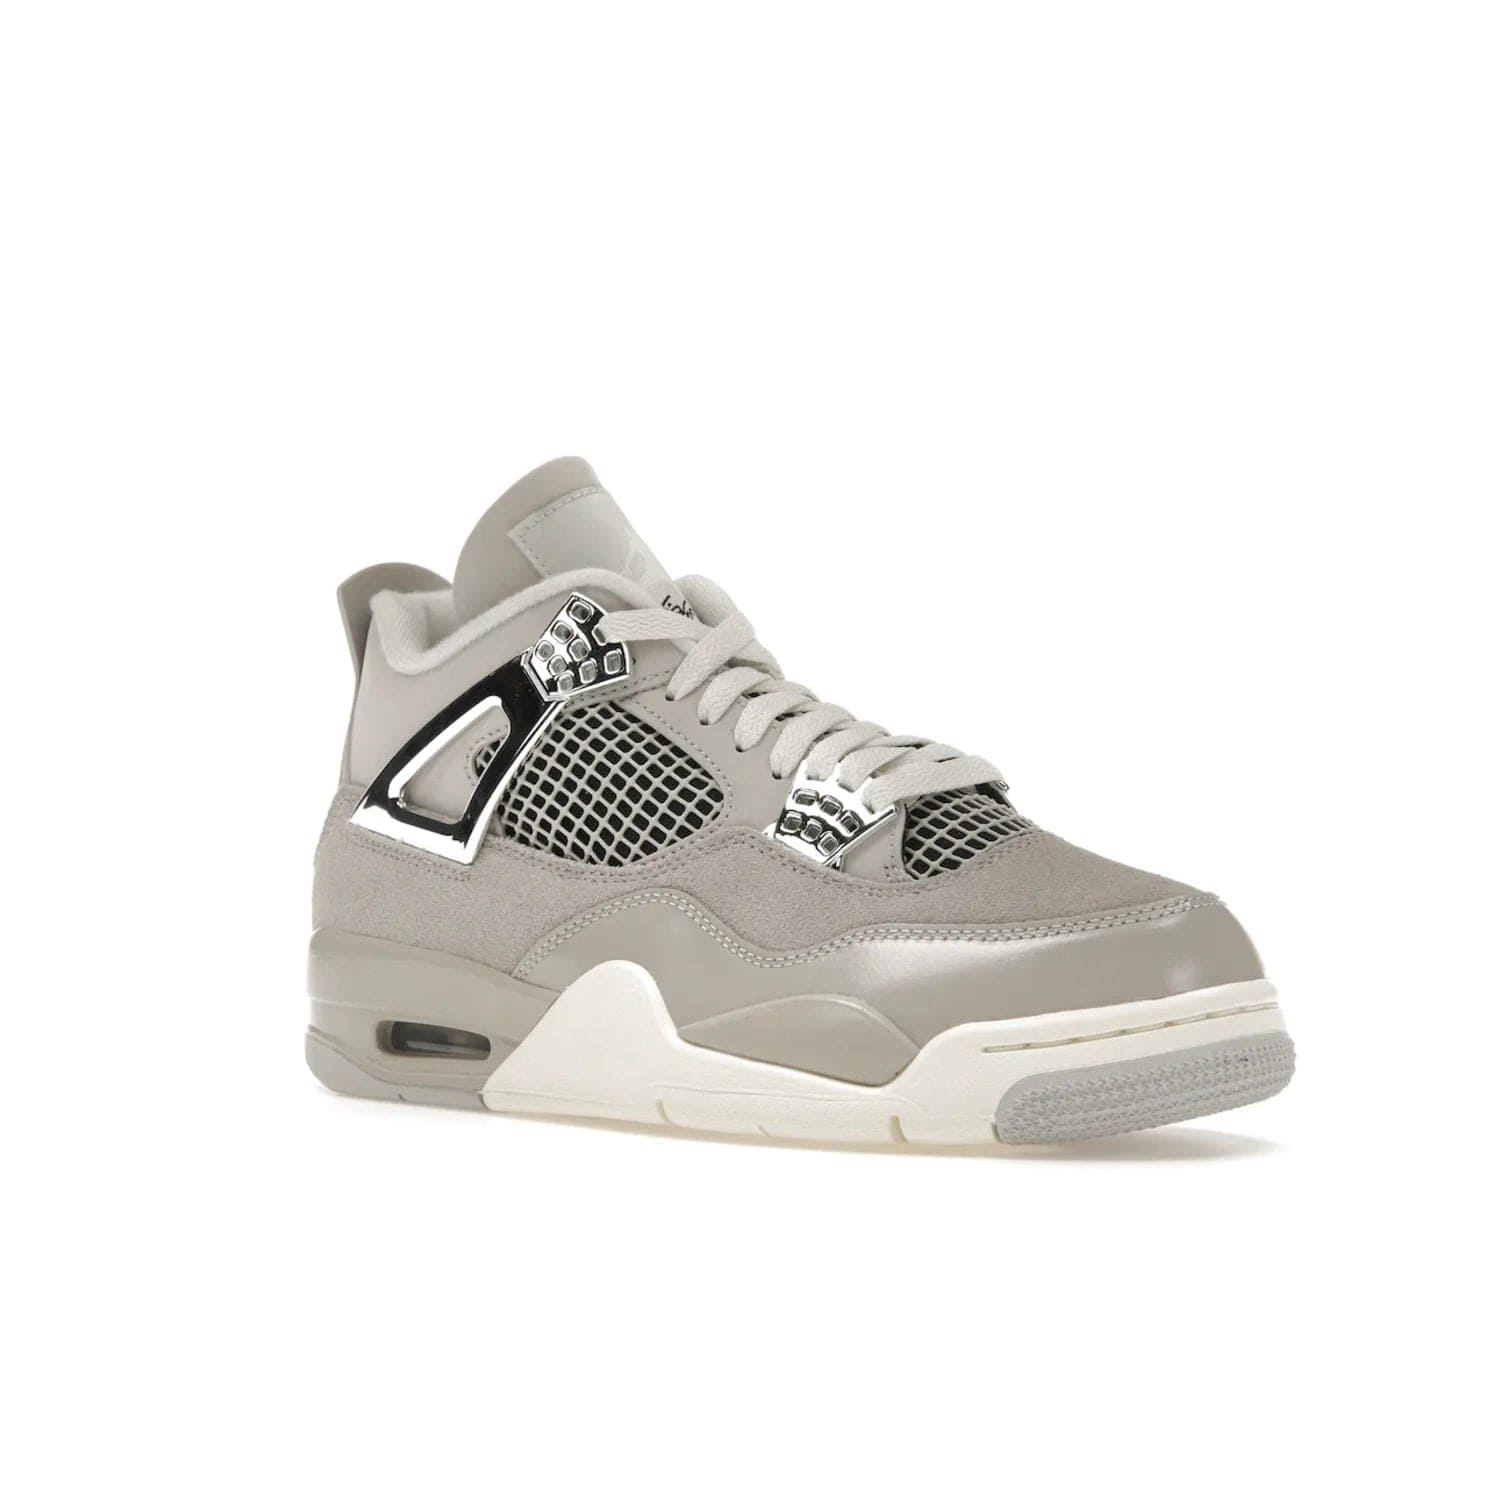 Jordan 4 Retro Frozen Moments (Women's) - Image 5 - Only at www.BallersClubKickz.com - The Jordan 4 Retro Frozen Moments is a stylish blend of classic design elements and modern tones. Featuring suede and leather overlays in a light iron-ore, sail, neutral grey, black, and metallic silver colorway. Get this iconic high-performance sneaker for $210.